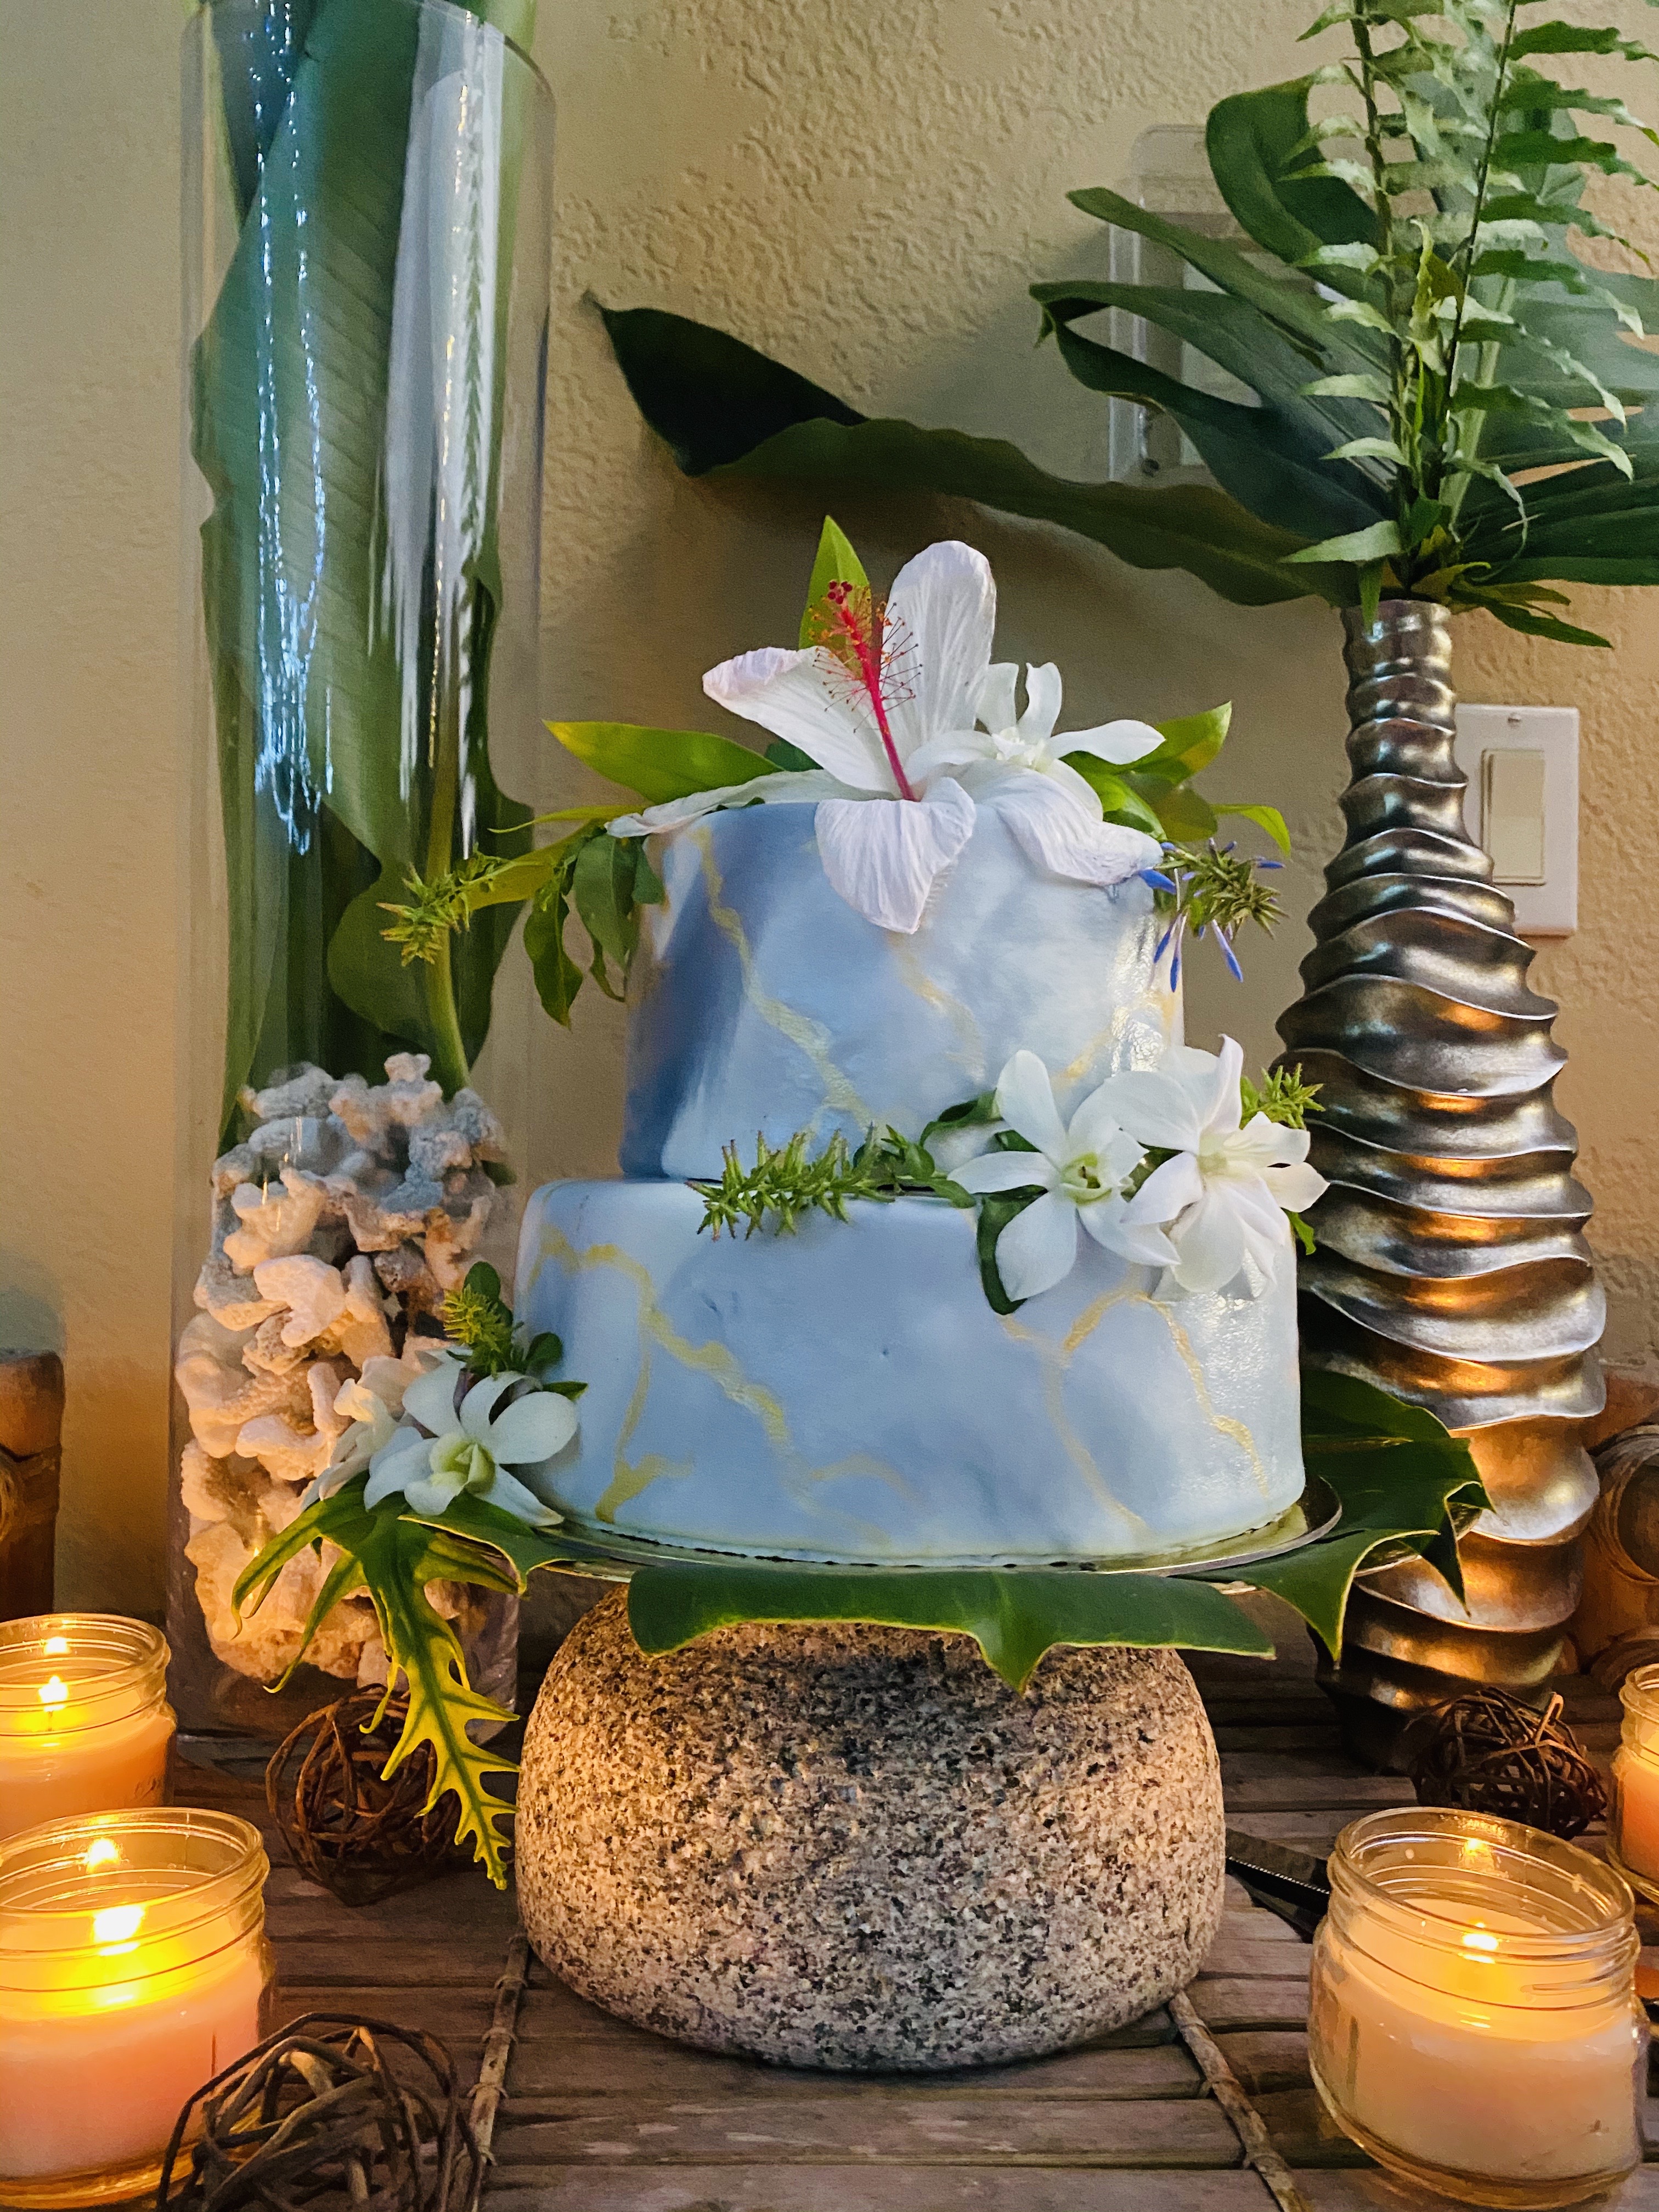 A beautiful 2-tier custom vegan wedding cake with gold leaf and fresh greenery for a destination wedding from Village Patisserie in Toledo, Ohio